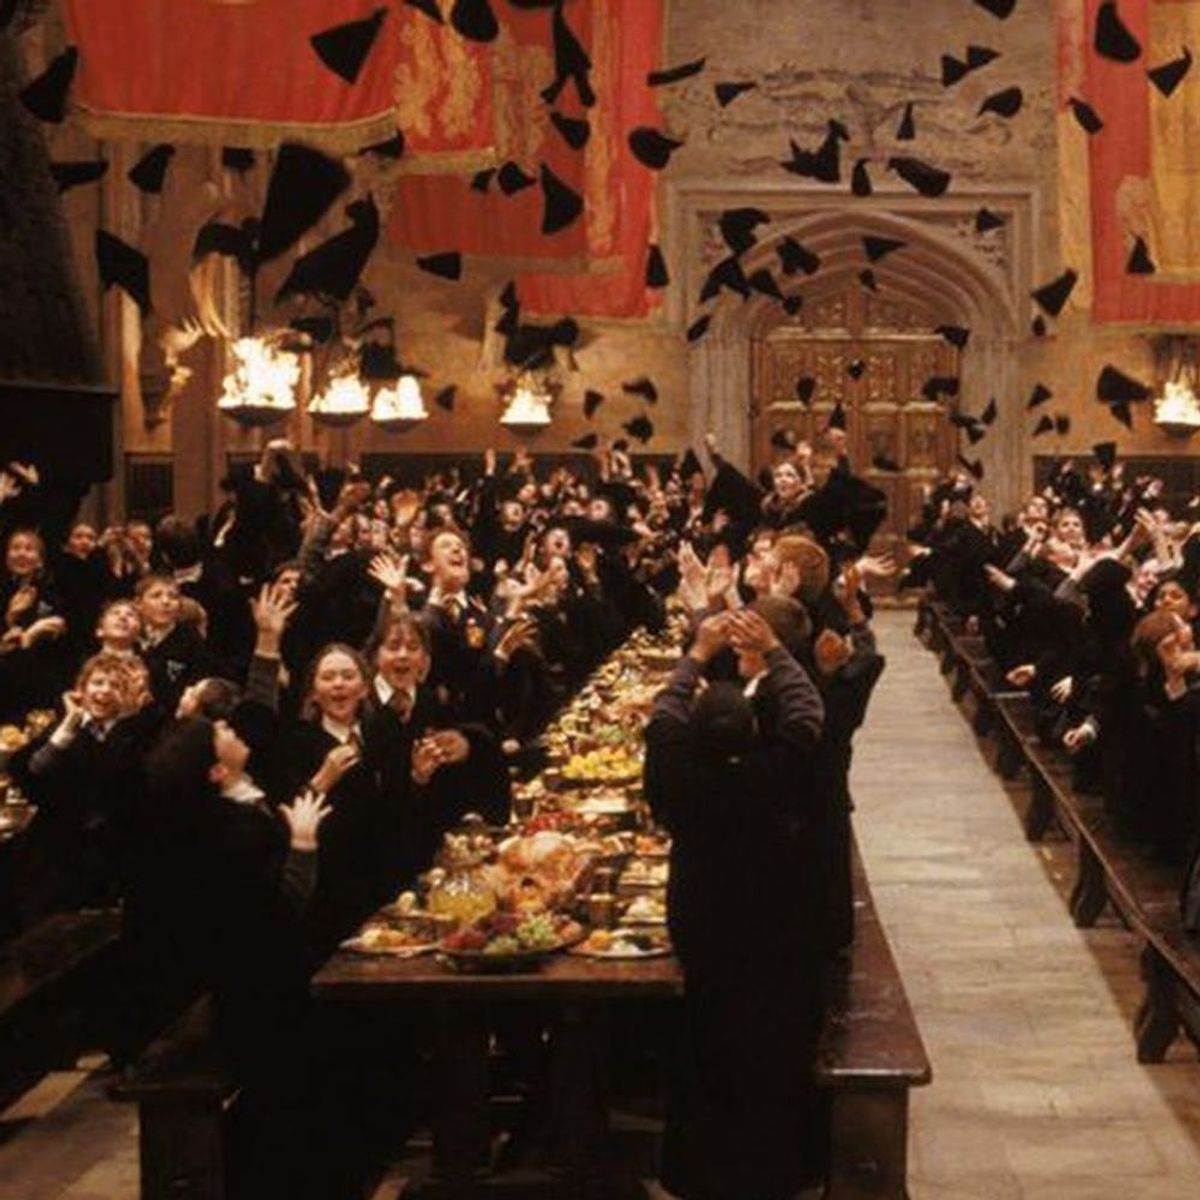 You Can Now Have Valentine’s Day Dinner in the Great Hall of Hogwarts